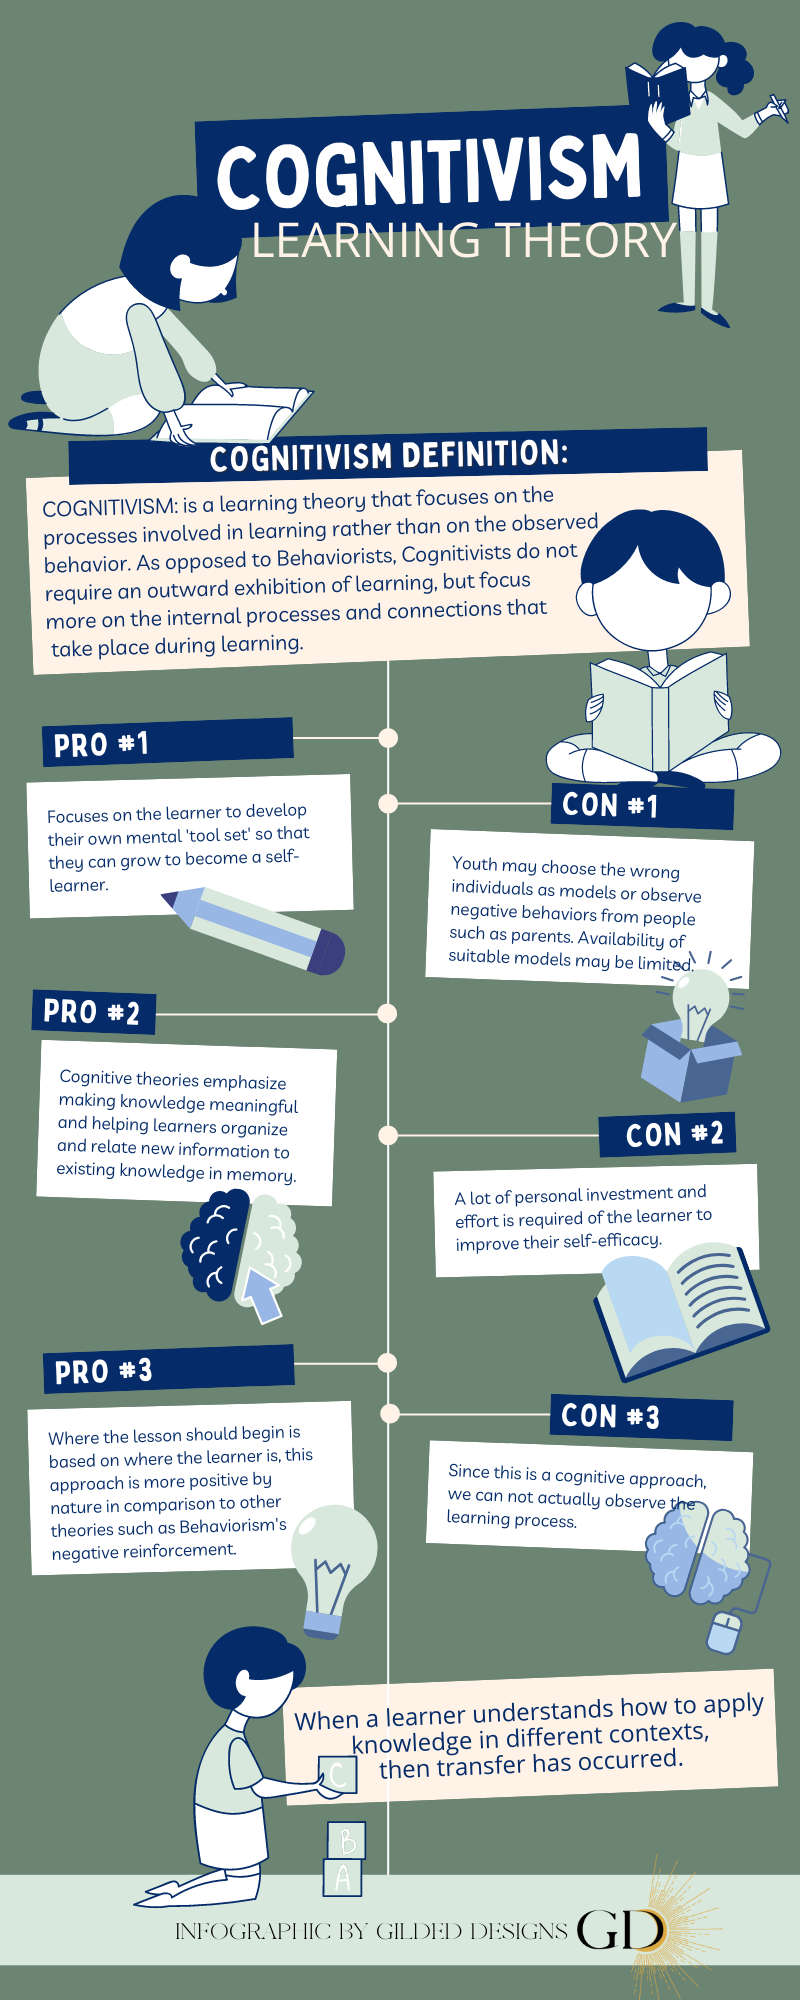 This is an infographic about cognitivism learning theory